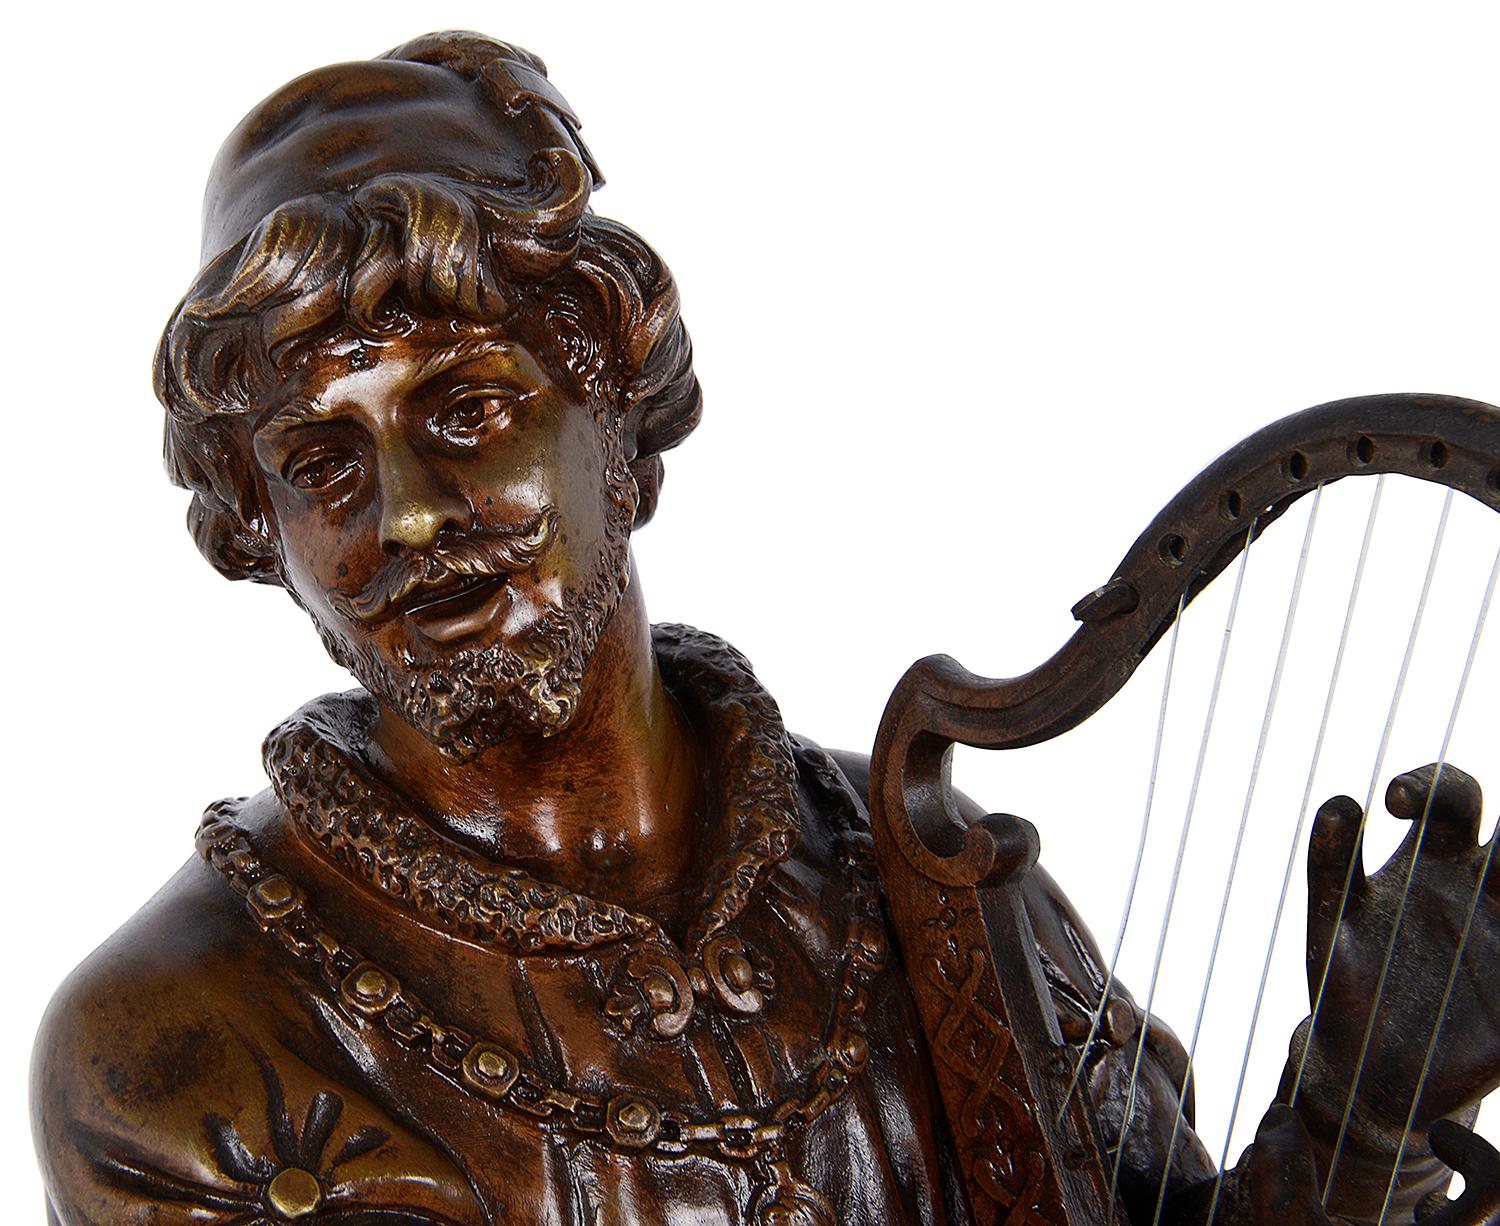 A very good quality late 19th Century French patinated bronze musician playing a Harp.

Signed;
Marcel Debut (1865-1933)

The son of the famous French 19th century sculptor Didier Debut. Marcel studied under Henri Chapu at the Ecole des Beaux